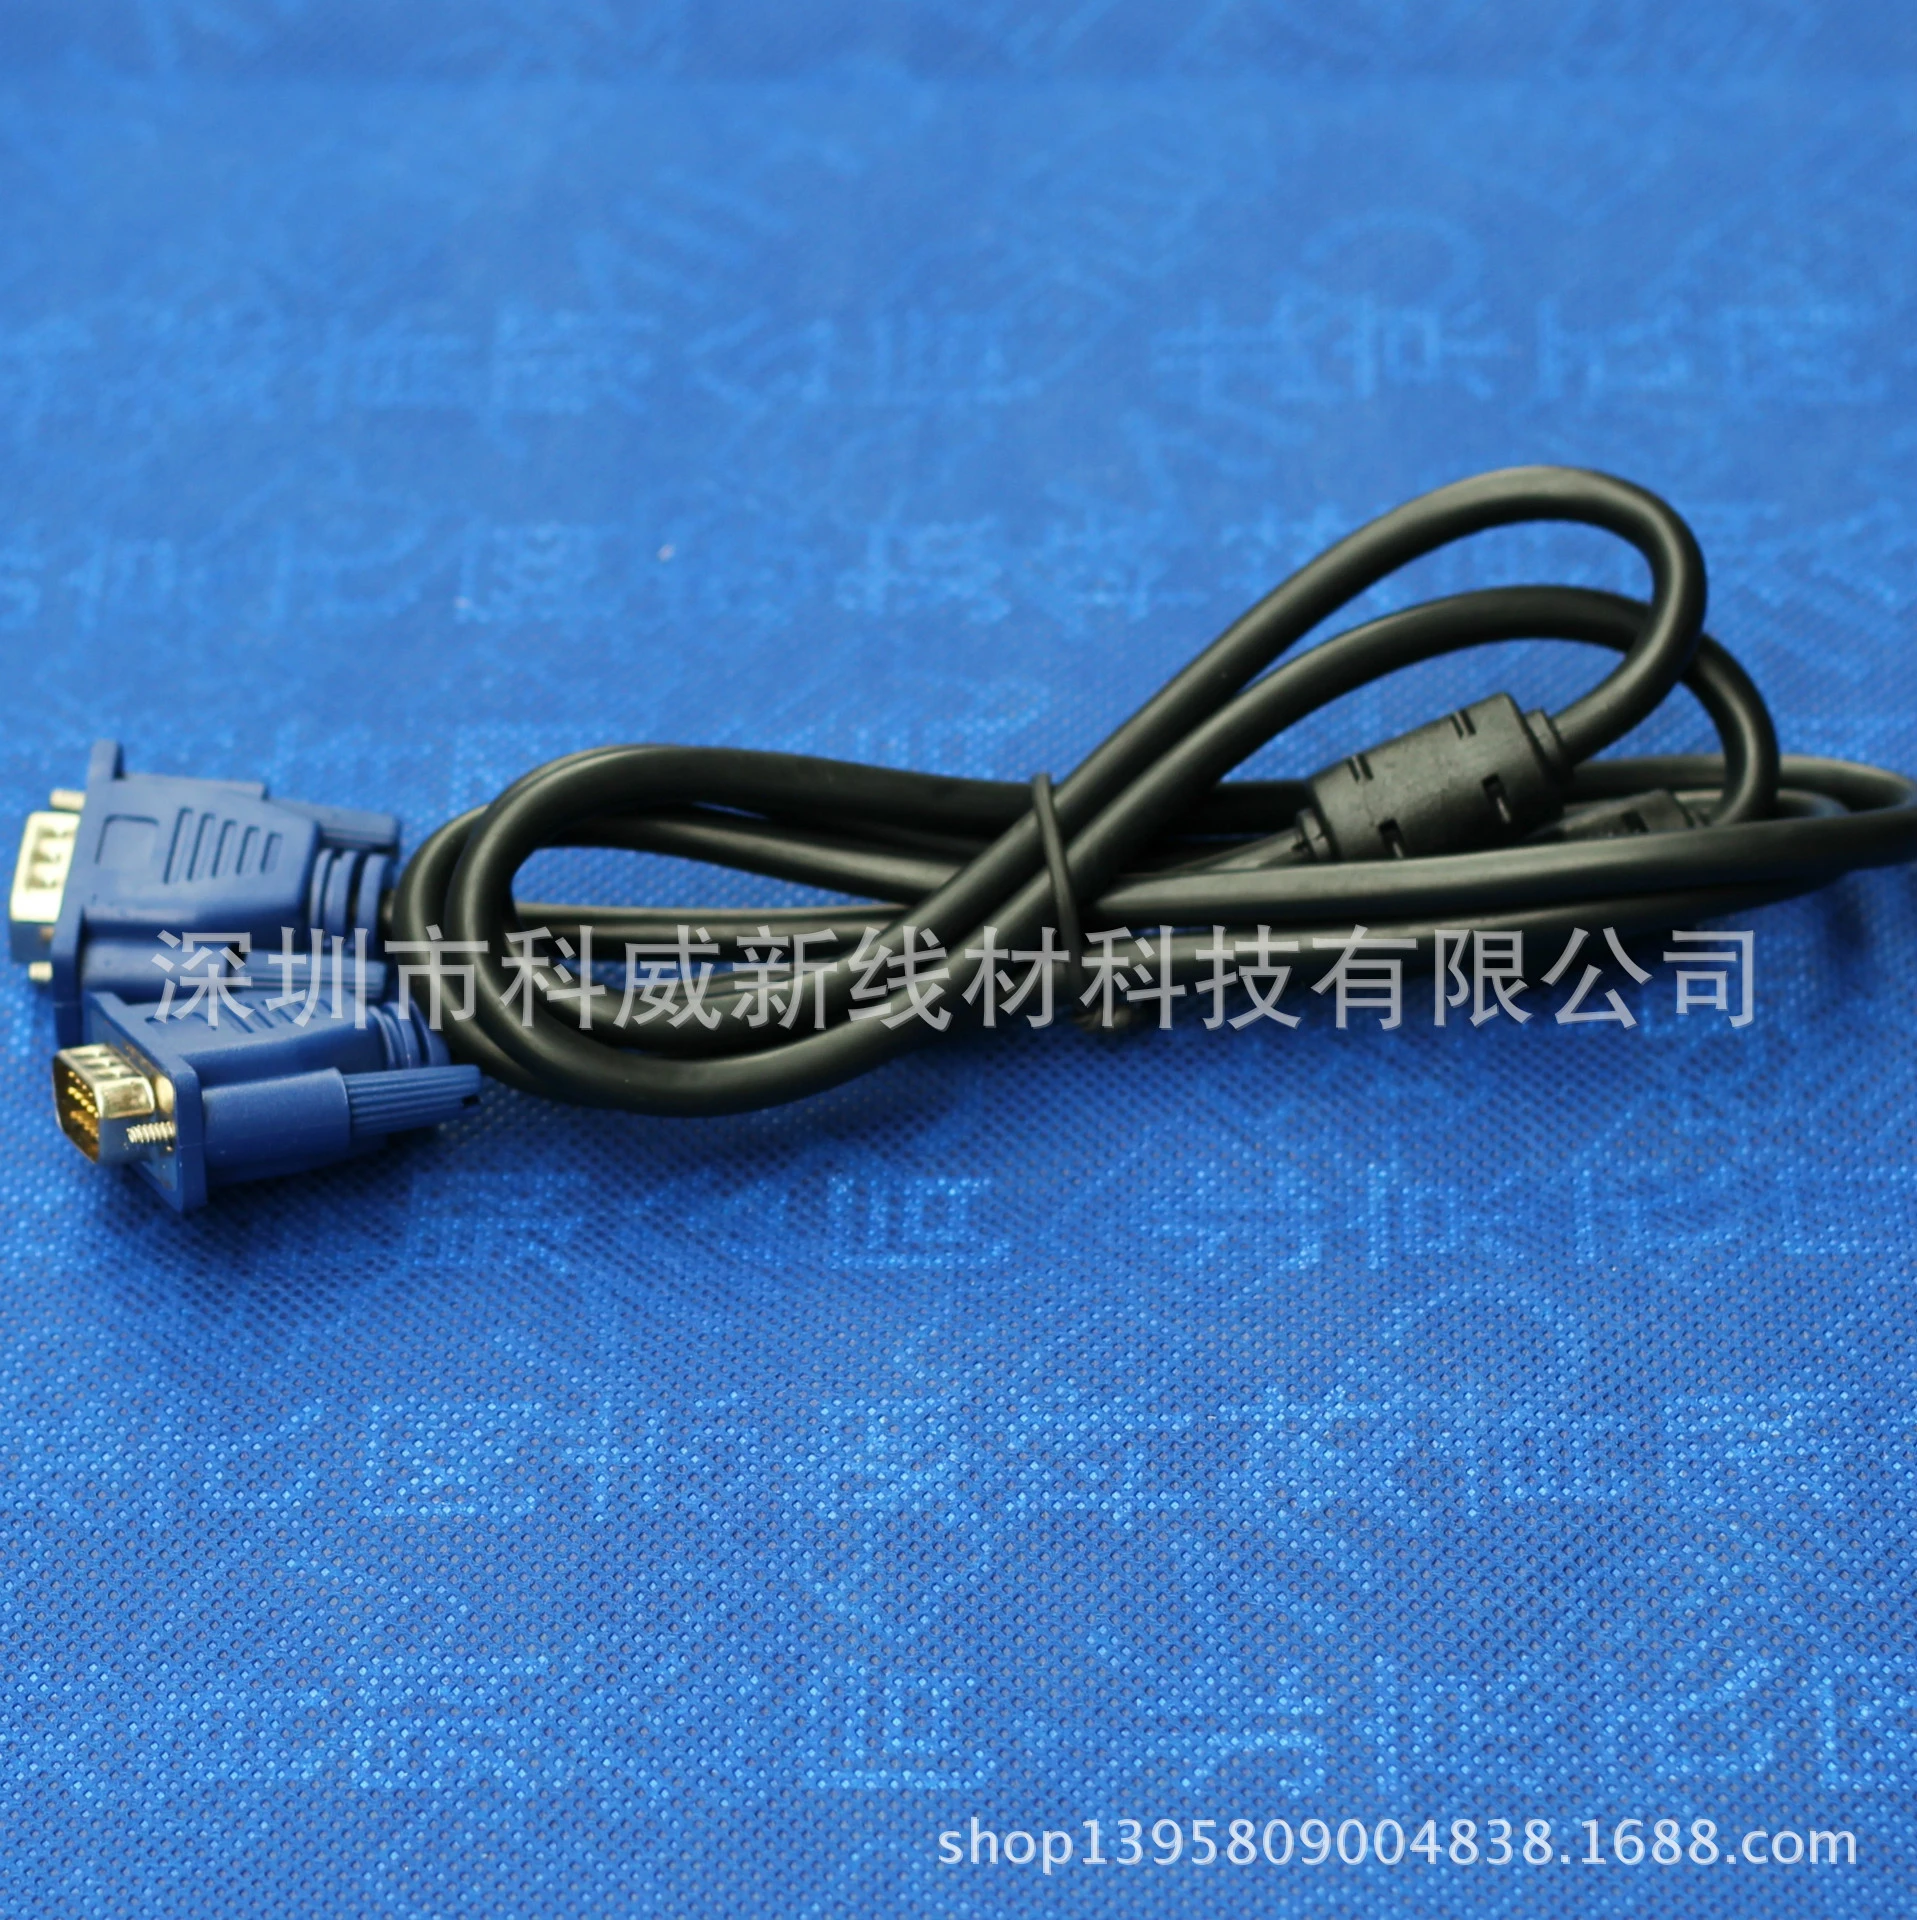 Factory price 1080 HD video vga cable stable transmission male to male vga for computer cable and projector